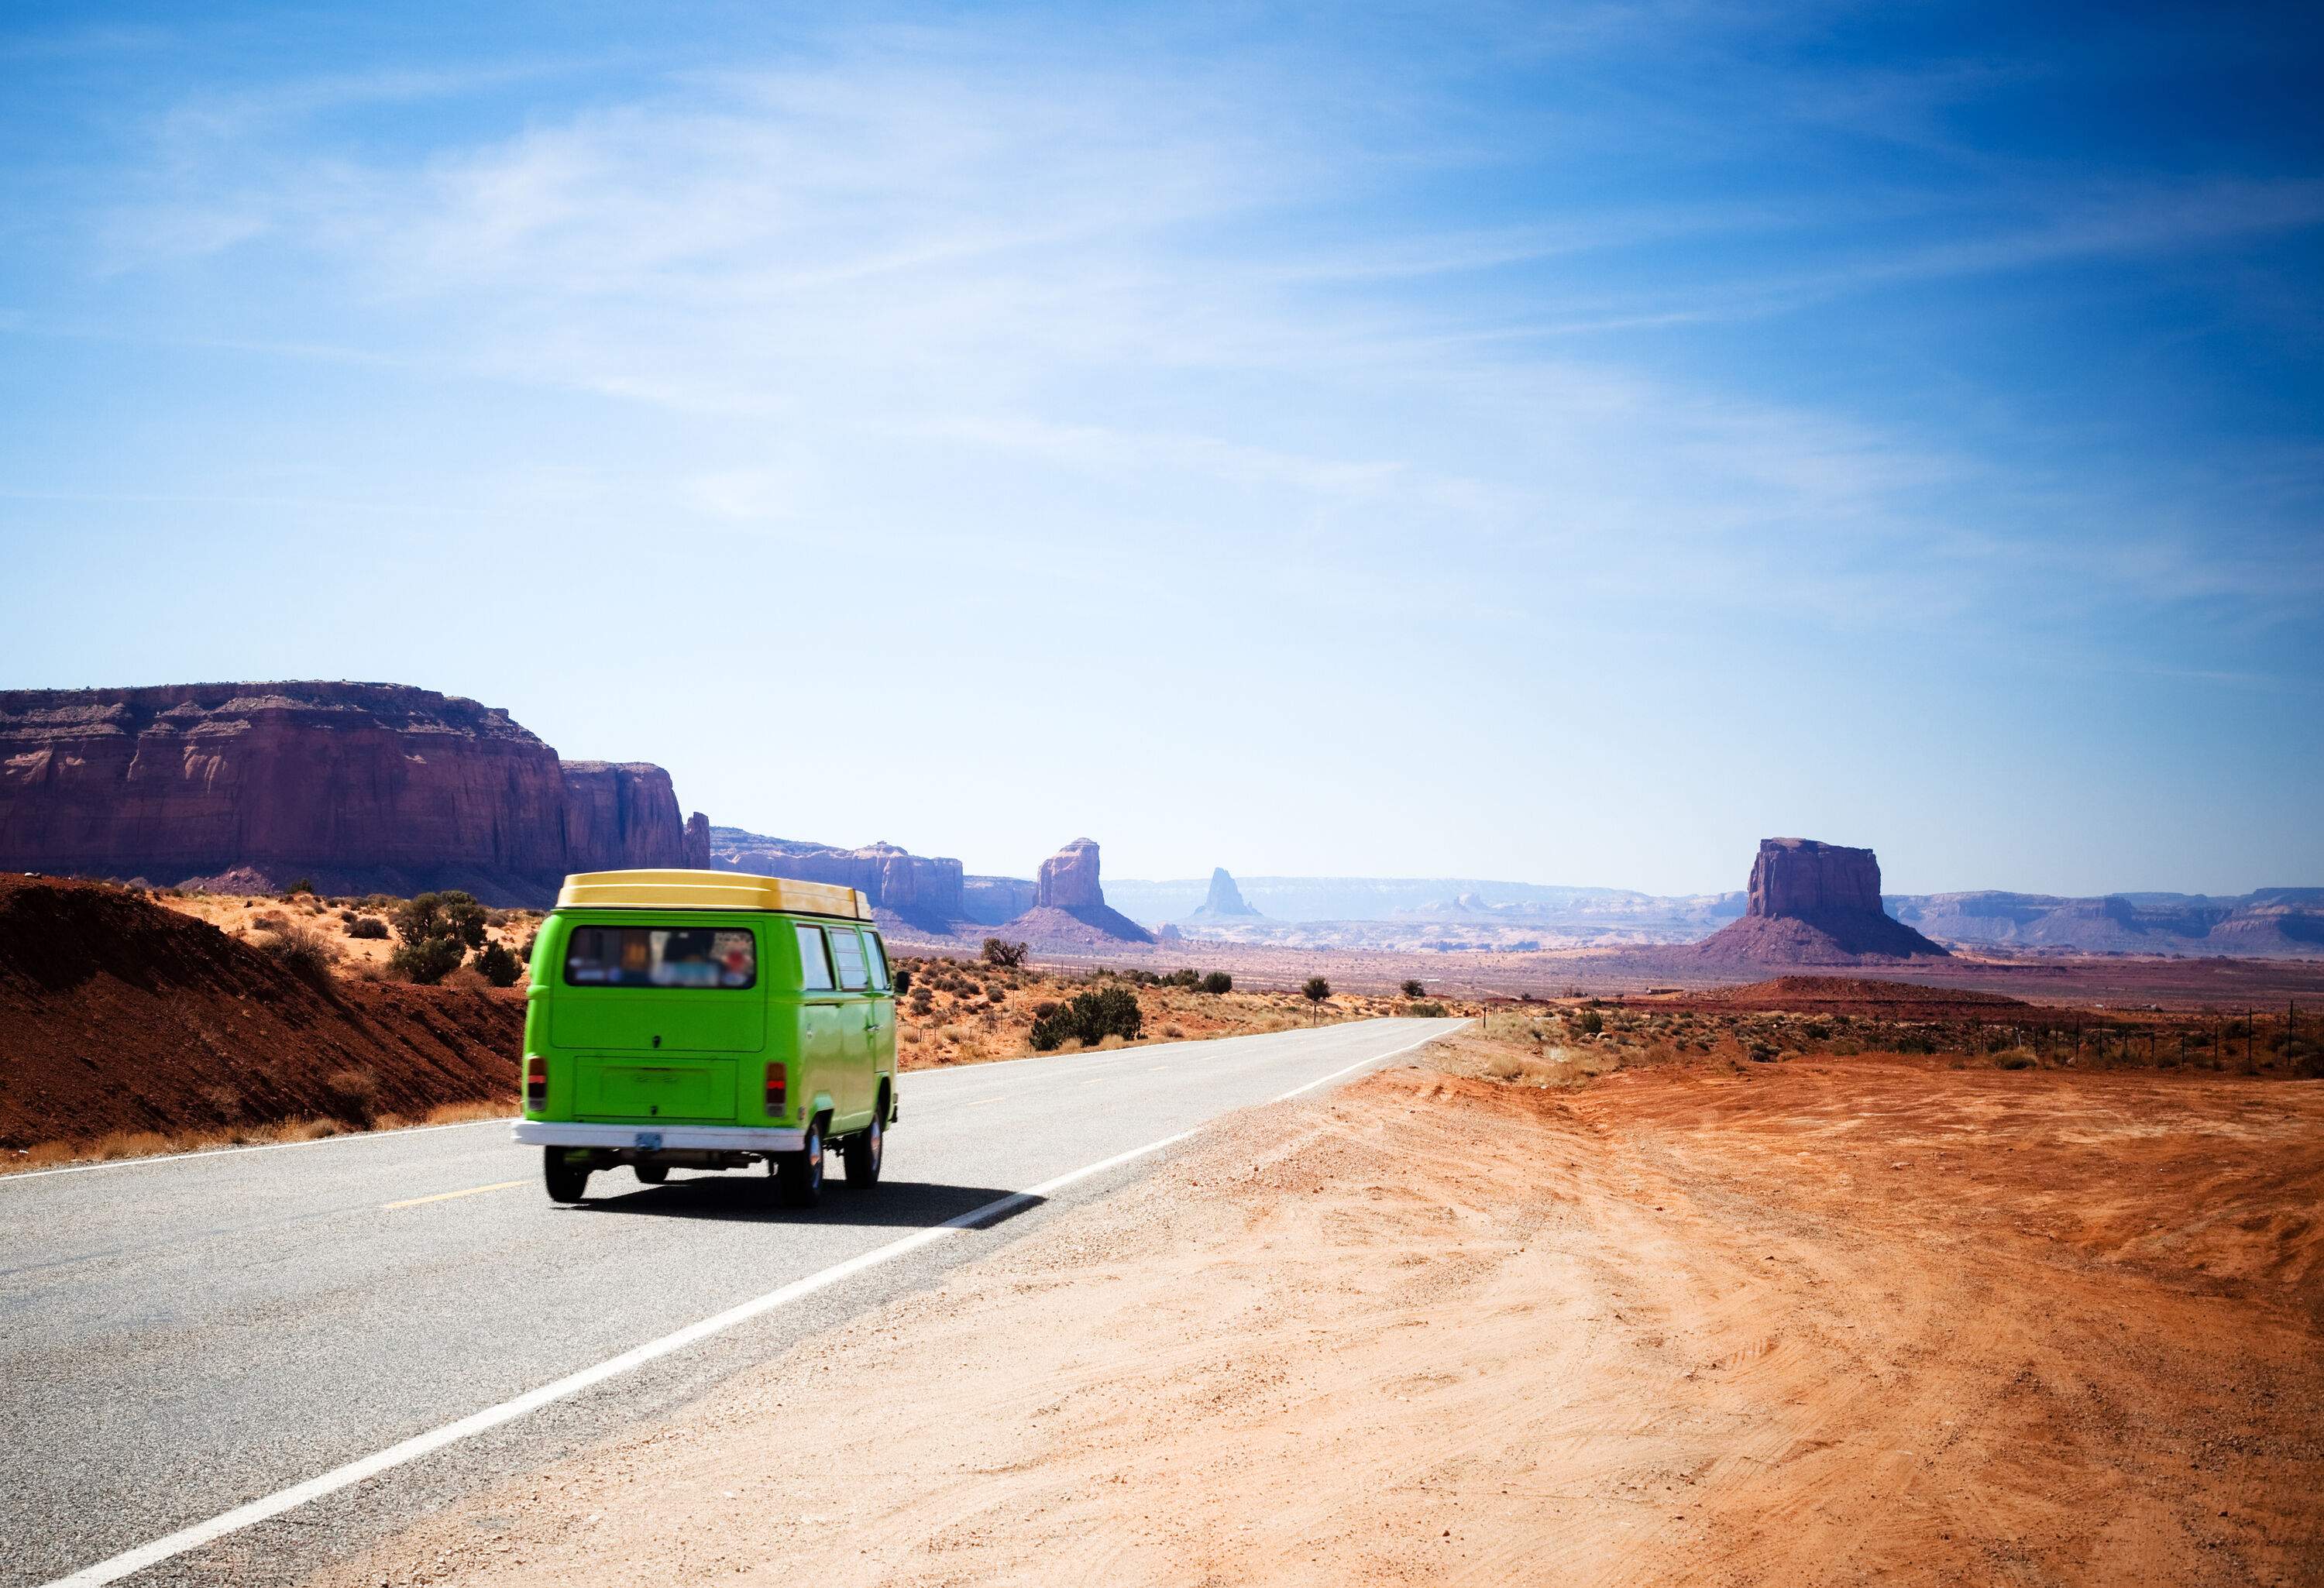 A bright green van driving down a roadway flanked by desolate landscape.